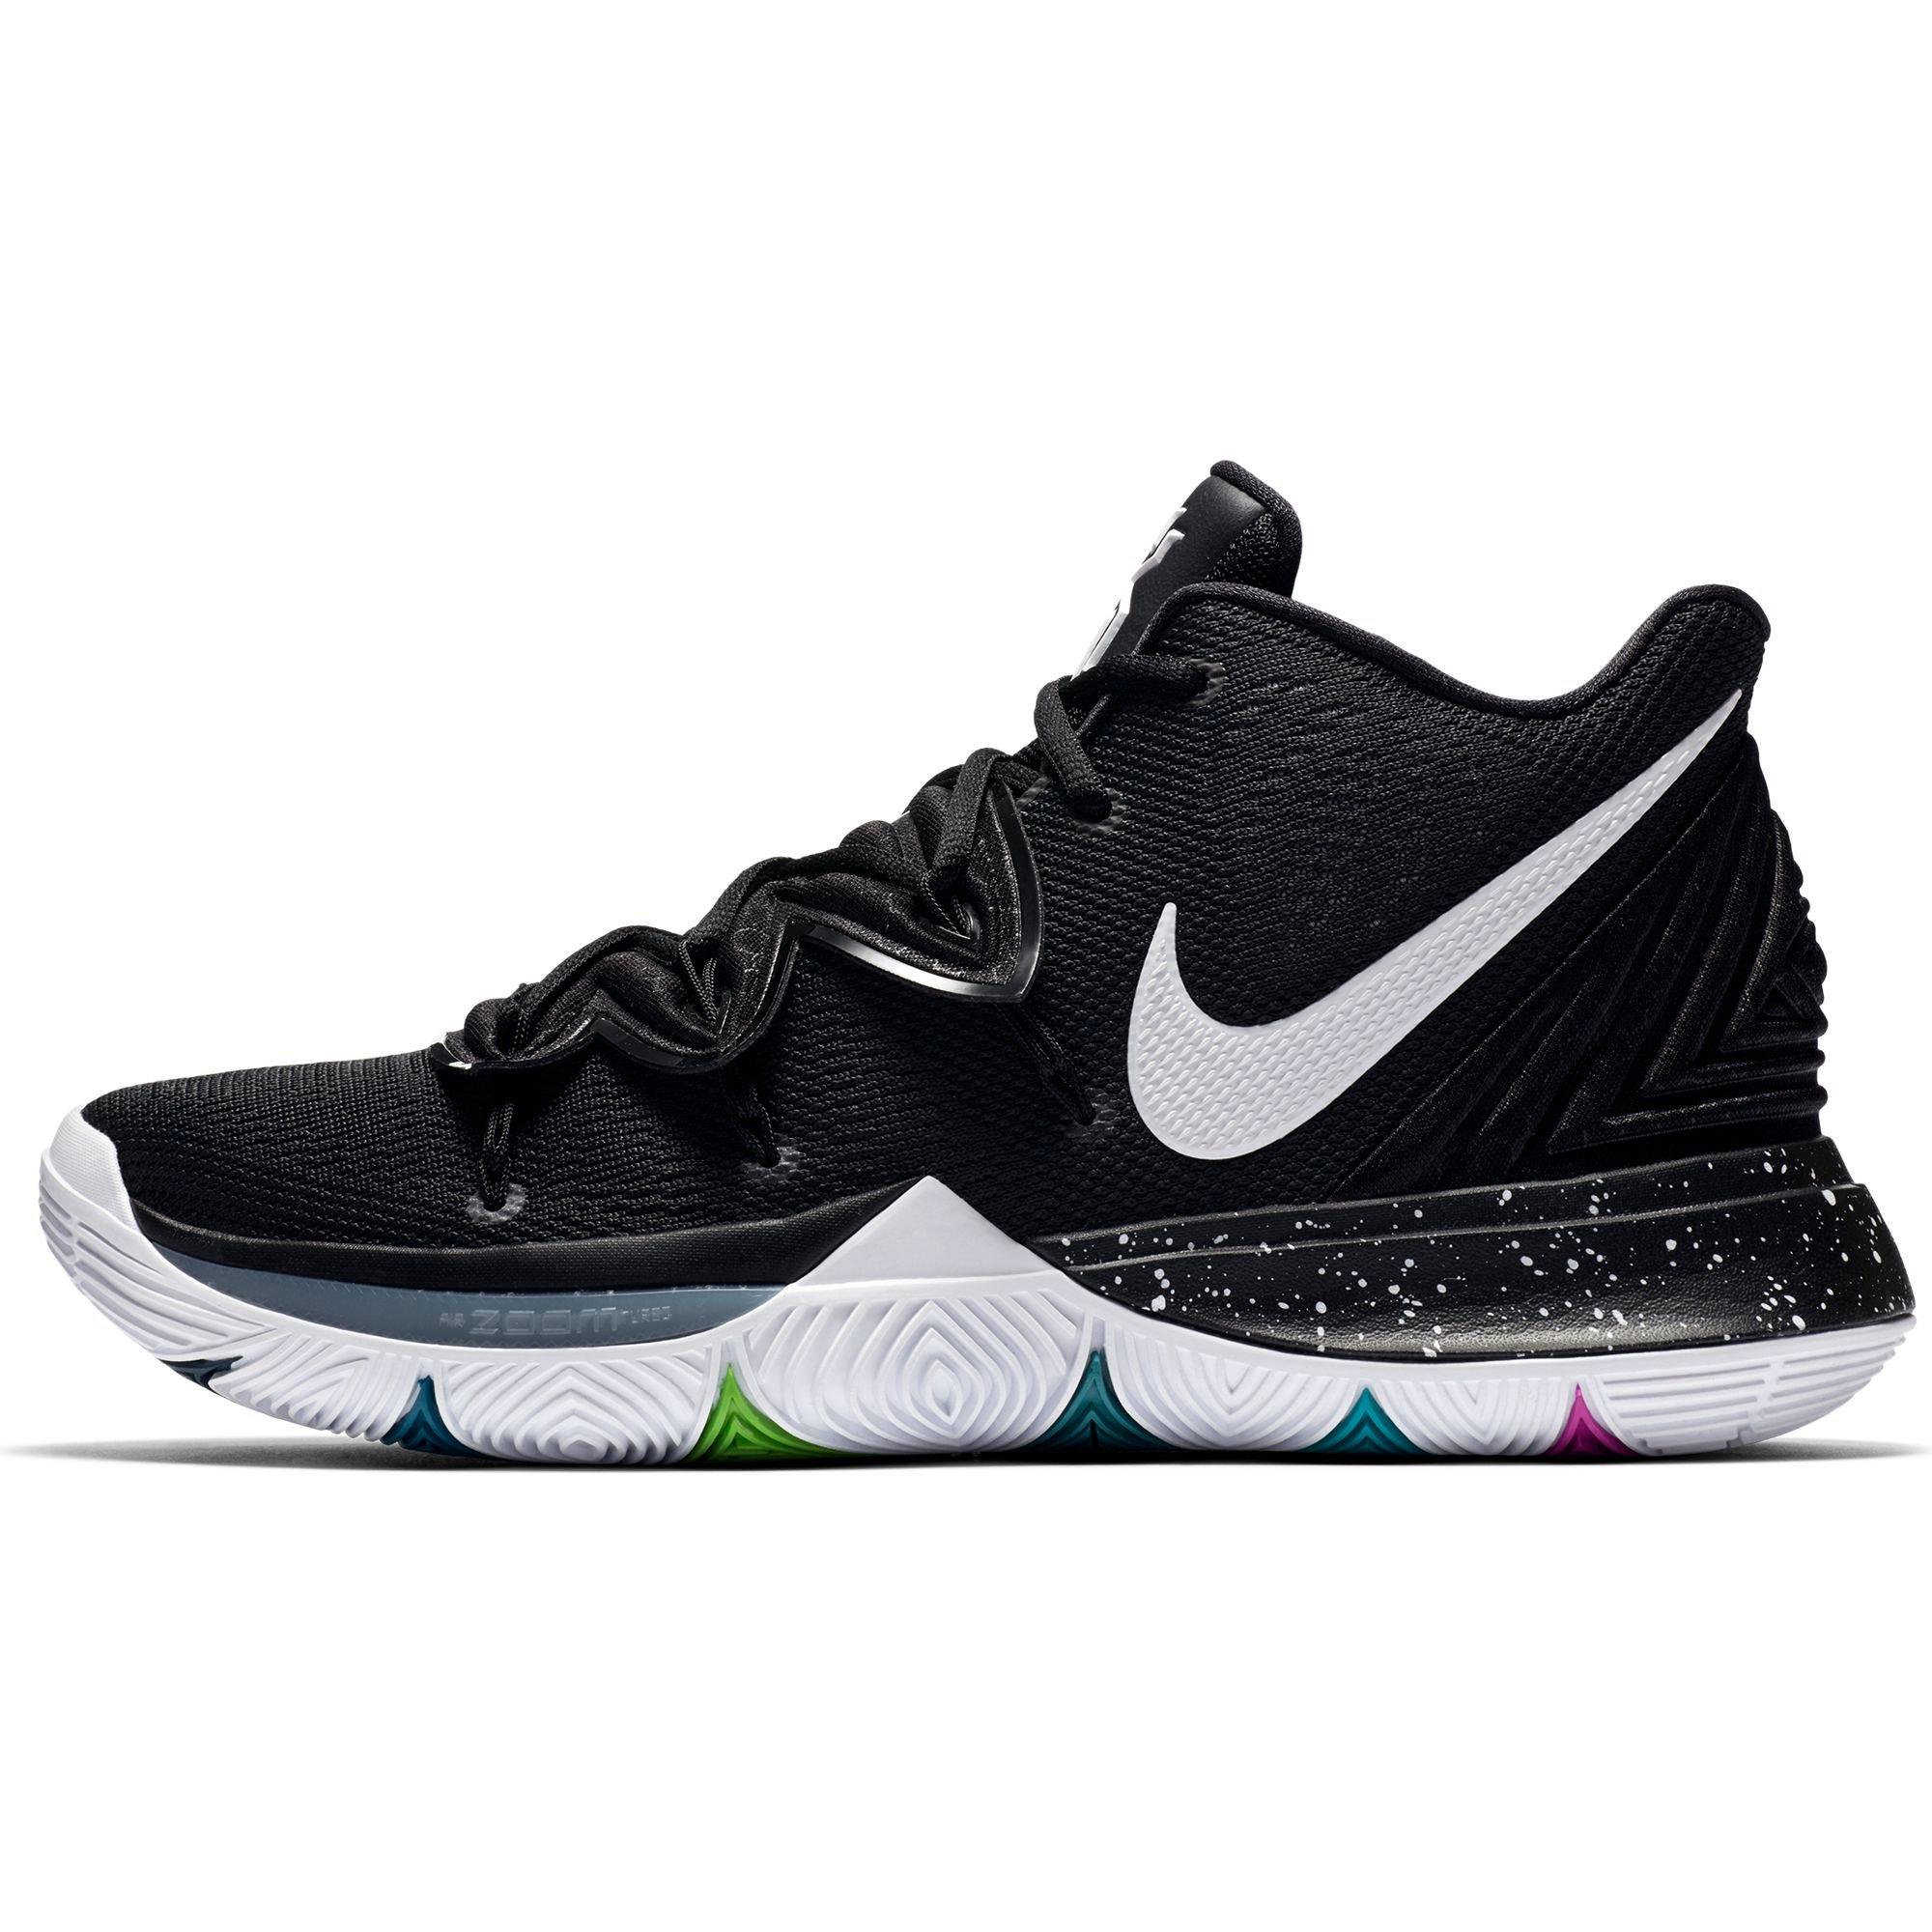 Nike Kyrie 5 EP irving 5 generation combat basketball shoes